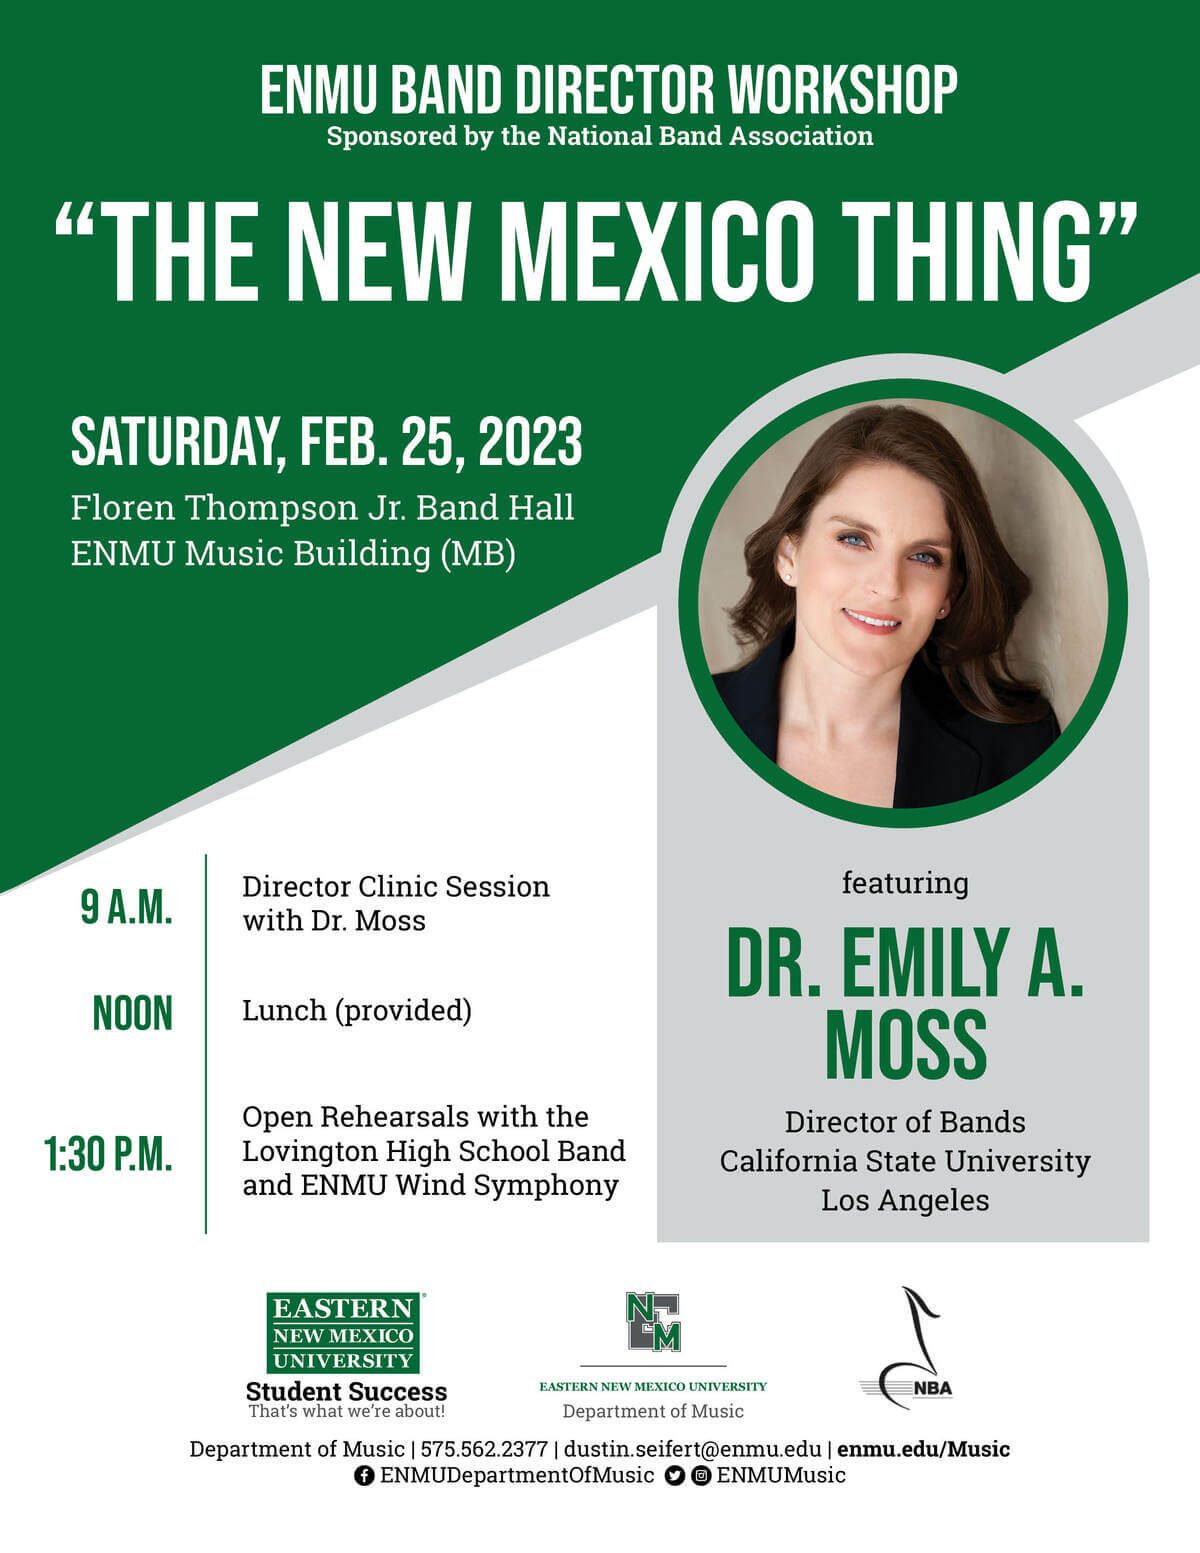 ENMU NM Thing featuring Dr. Emily A. Moss